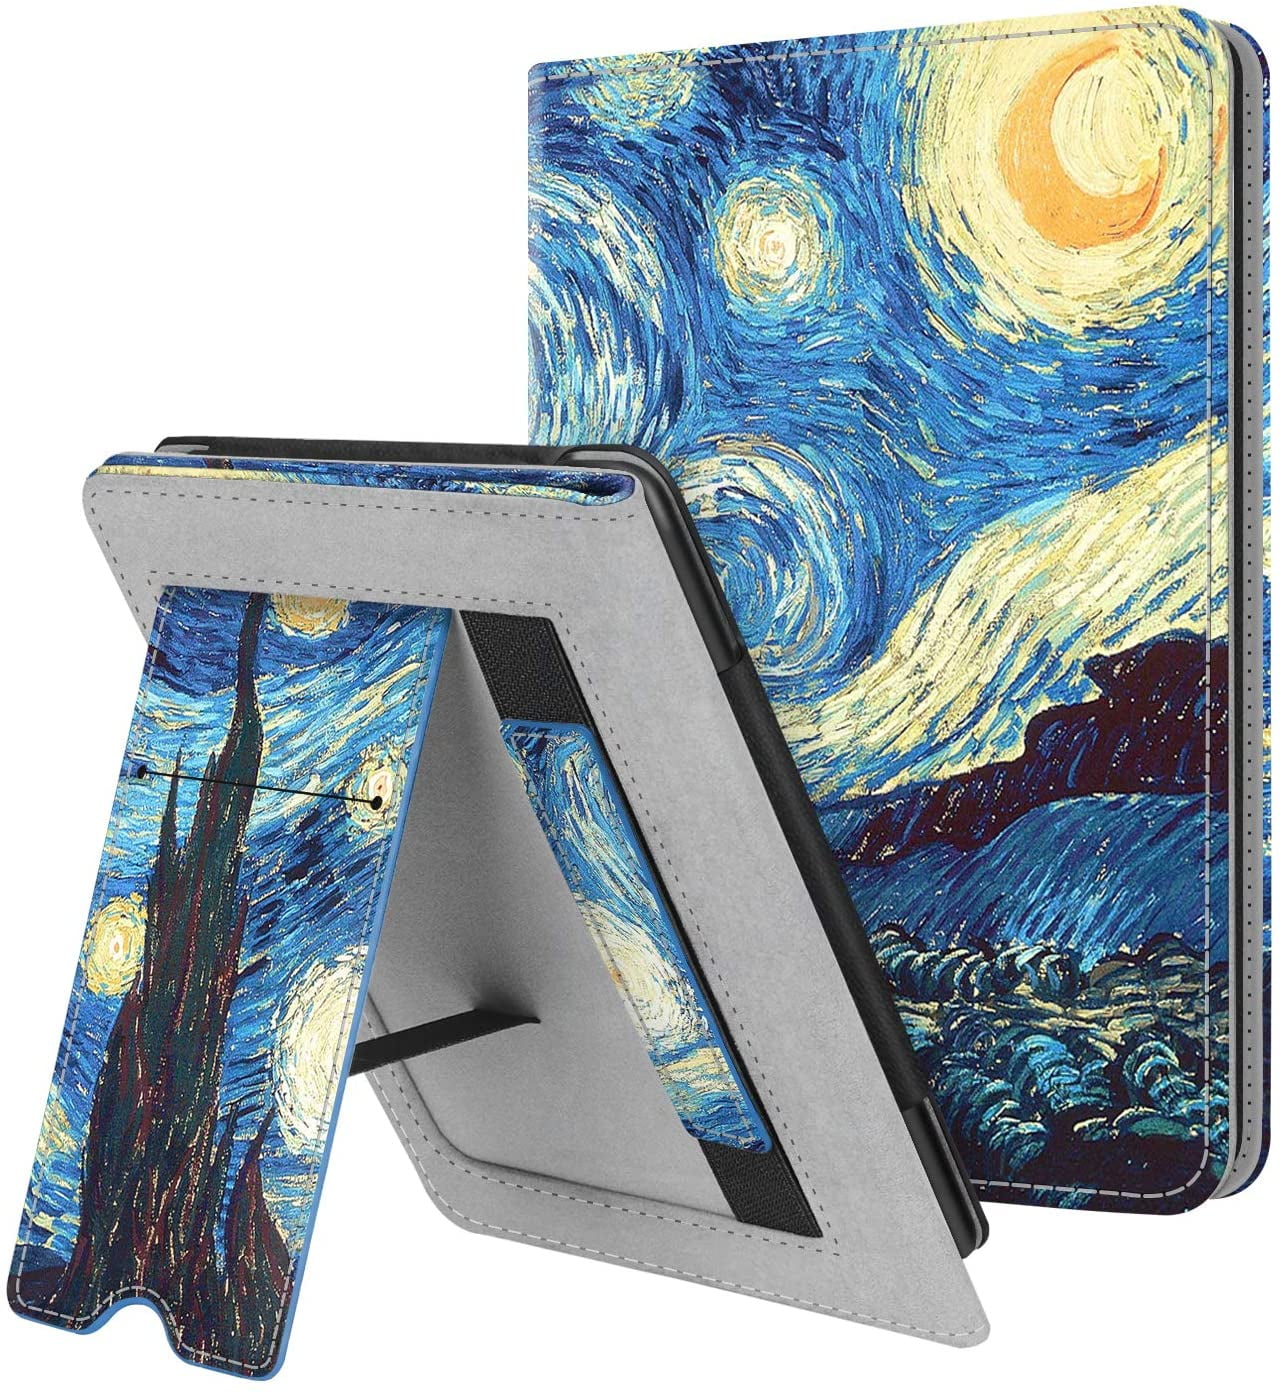 - Premium PU Leather Protective Sleeve Cover with Card Slot and Hand Strap Shades of Blue 10th Generation, 2019 / Kindle 8th Generation, 2016 Fintie Stand Case for All-New Kindle 